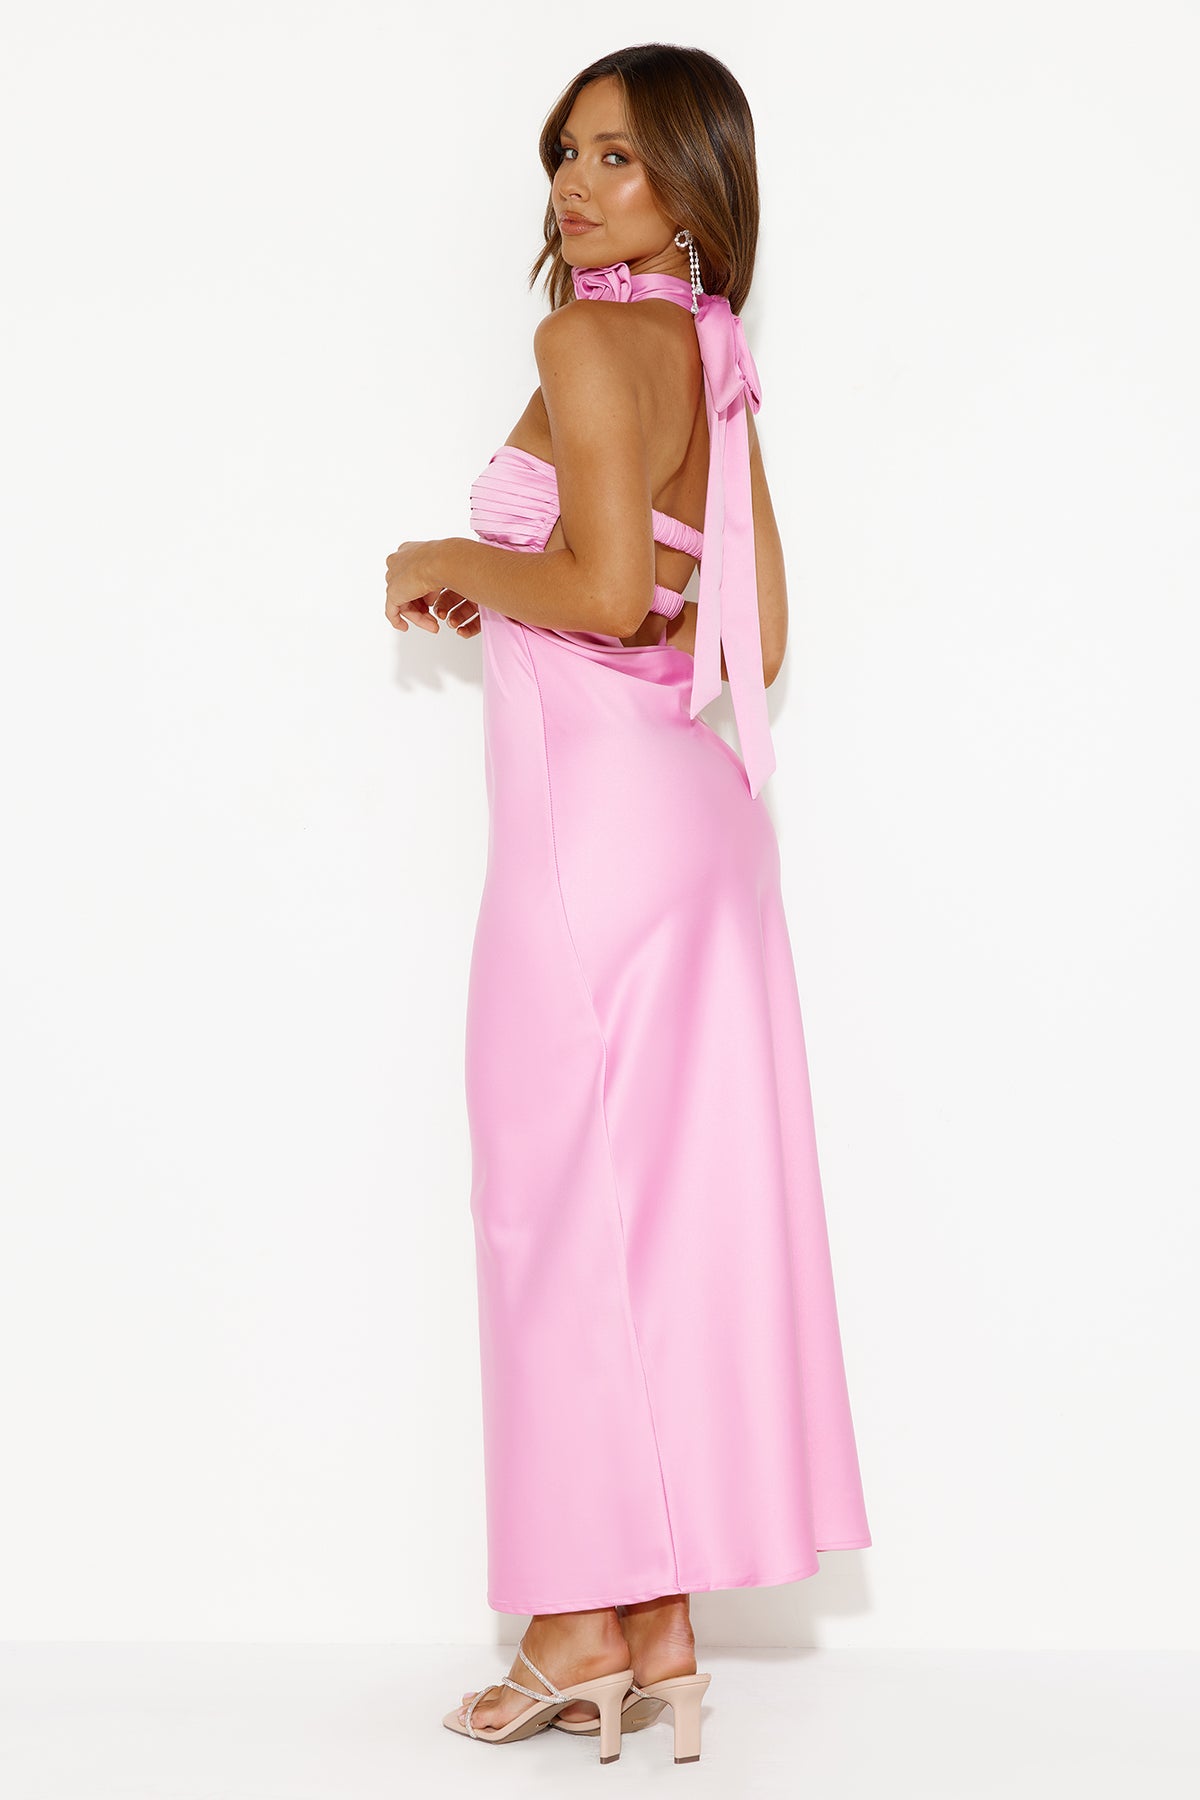 Shop Formal Dress - Forever Trend Strapless Satin Maxi Dress Pink sixth image